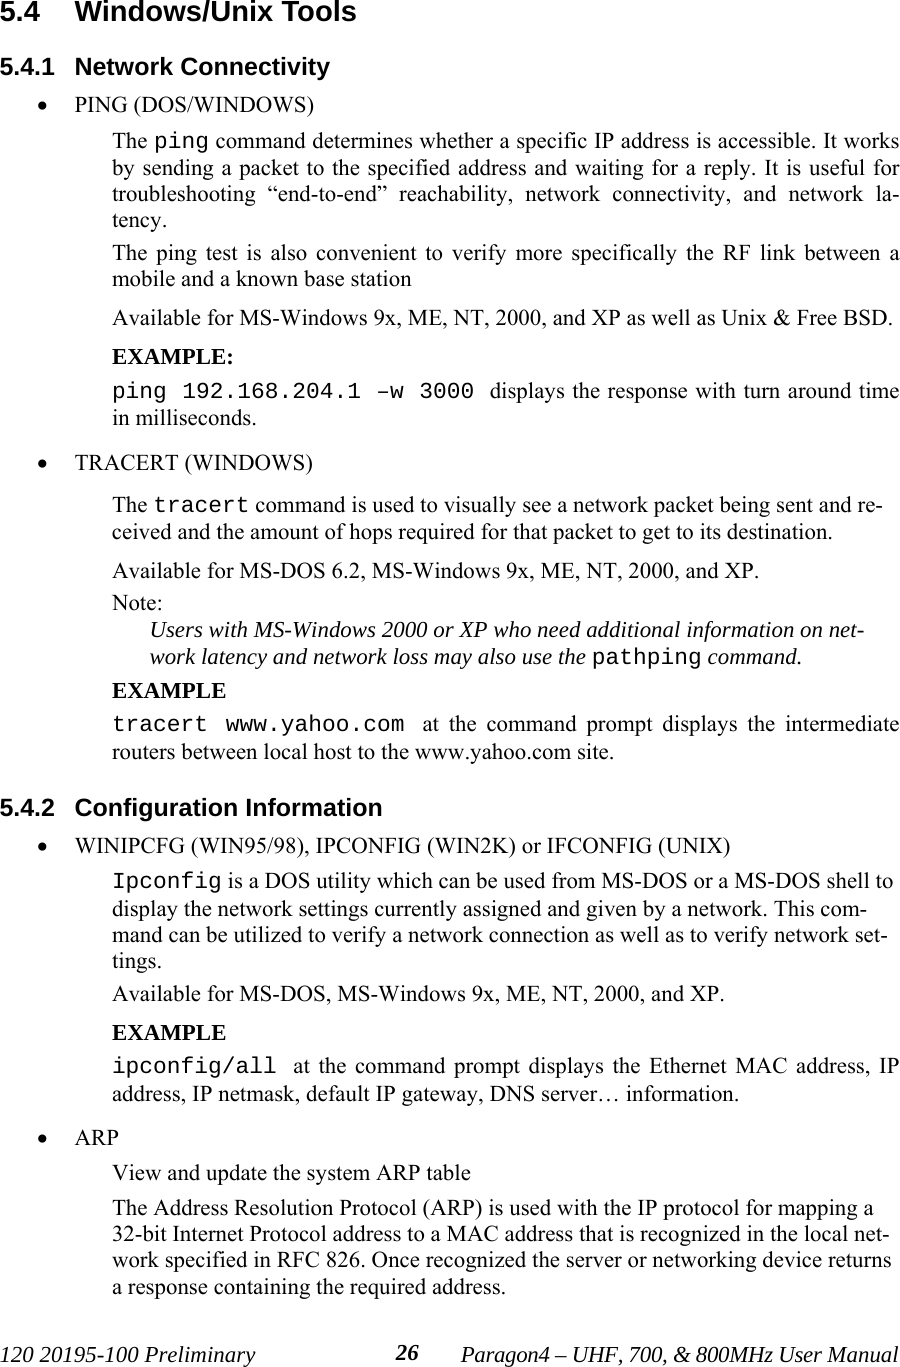 120 20195-100 Preliminary Paragon4 – UHF, 700, &amp; 800MHz User Manual265.4  Windows/Unix Tools5.4.1  Network Connectivity• PING (DOS/WINDOWS)The ping command determines whether a specific IP address is accessible. It worksby sending a packet to the specified address and waiting for a reply. It is useful fortroubleshooting “end-to-end” reachability, network connectivity, and network la-tency. The ping test is also convenient to verify more specifically the RF link between amobile and a known base stationAvailable for MS-Windows 9x, ME, NT, 2000, and XP as well as Unix &amp; Free BSD.EXAMPLE:ping 192.168.204.1 –w 3000 displays the response with turn around timein milliseconds.• TRACERT (WINDOWS)The tracert command is used to visually see a network packet being sent and re-ceived and the amount of hops required for that packet to get to its destination. Available for MS-DOS 6.2, MS-Windows 9x, ME, NT, 2000, and XP.Note:Users with MS-Windows 2000 or XP who need additional information on net-work latency and network loss may also use the pathping command.EXAMPLEtracert www.yahoo.com at the command prompt displays the intermediaterouters between local host to the www.yahoo.com site.5.4.2  Configuration Information• WINIPCFG (WIN95/98), IPCONFIG (WIN2K) or IFCONFIG (UNIX) Ipconfig is a DOS utility which can be used from MS-DOS or a MS-DOS shell todisplay the network settings currently assigned and given by a network. This com-mand can be utilized to verify a network connection as well as to verify network set-tings.Available for MS-DOS, MS-Windows 9x, ME, NT, 2000, and XP.EXAMPLEipconfig/all at the command prompt displays the Ethernet MAC address, IPaddress, IP netmask, default IP gateway, DNS server… information.• ARP View and update the system ARP tableThe Address Resolution Protocol (ARP) is used with the IP protocol for mapping a32-bit Internet Protocol address to a MAC address that is recognized in the local net-work specified in RFC 826. Once recognized the server or networking device returnsa response containing the required address.